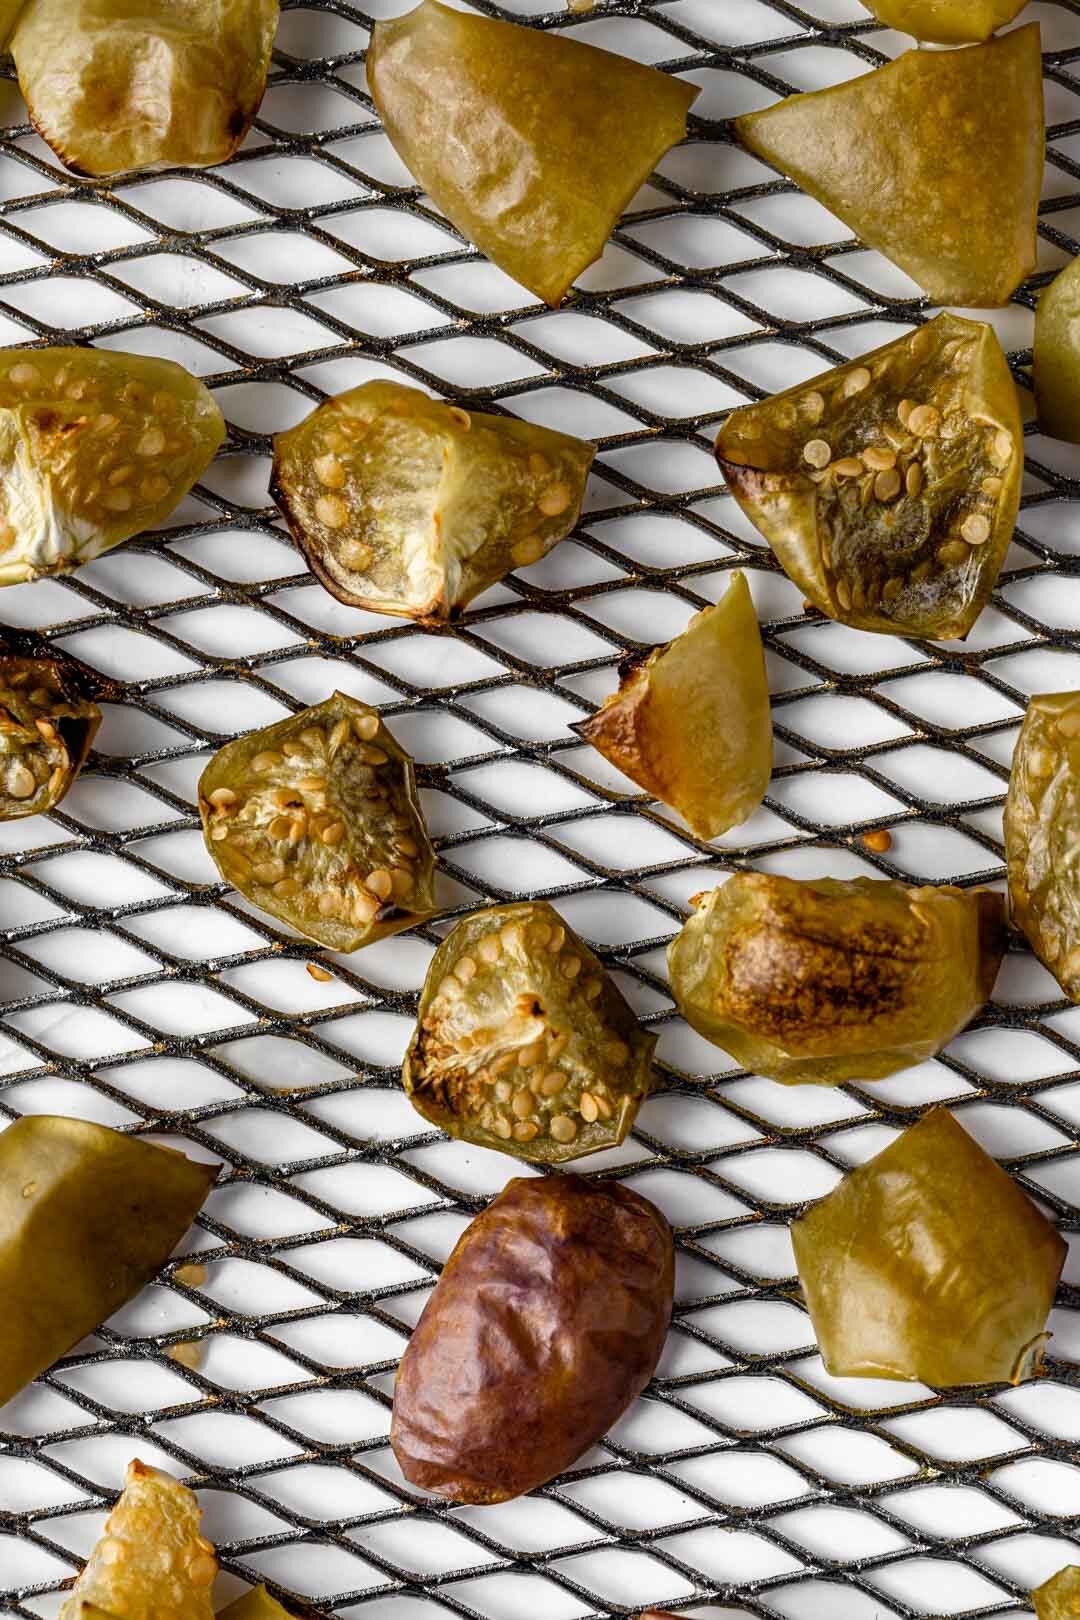 These beautifully golden roasted tomatillos have no oil in the recipe and are so quick and easy to make in the air fryer or oven, adding a beautiful sweet-tart flavor to your dishes, especially bean and potato-based foods. By Beautiful Ingredient.    #tomatillos #tomatillosrecipes #tomatillorecipe #roastedtomatillo #airfryer #tomatillo #airfryerrecipes #vegan #oilfree #oilfreeveganrecipes